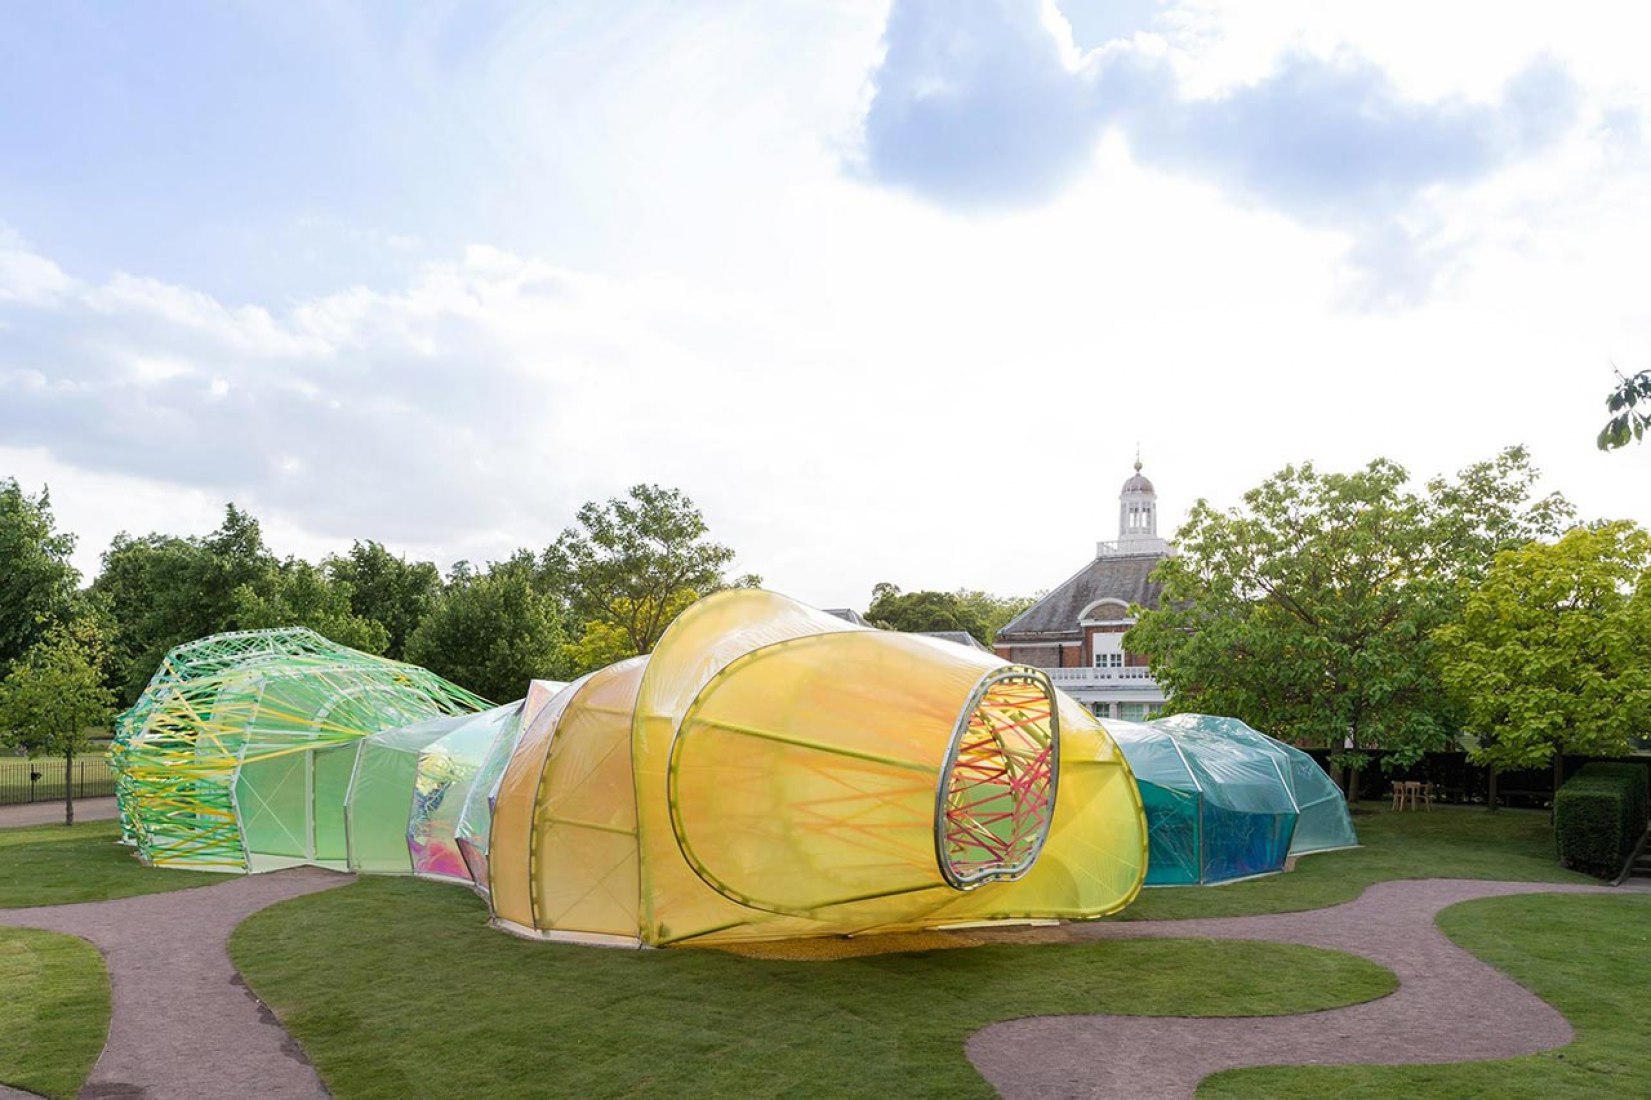 2015 Serpentine Gallery Pavilion by SelgasCano. Photograph © Iwan Baan. Image courtesy of Serpentine Galleries